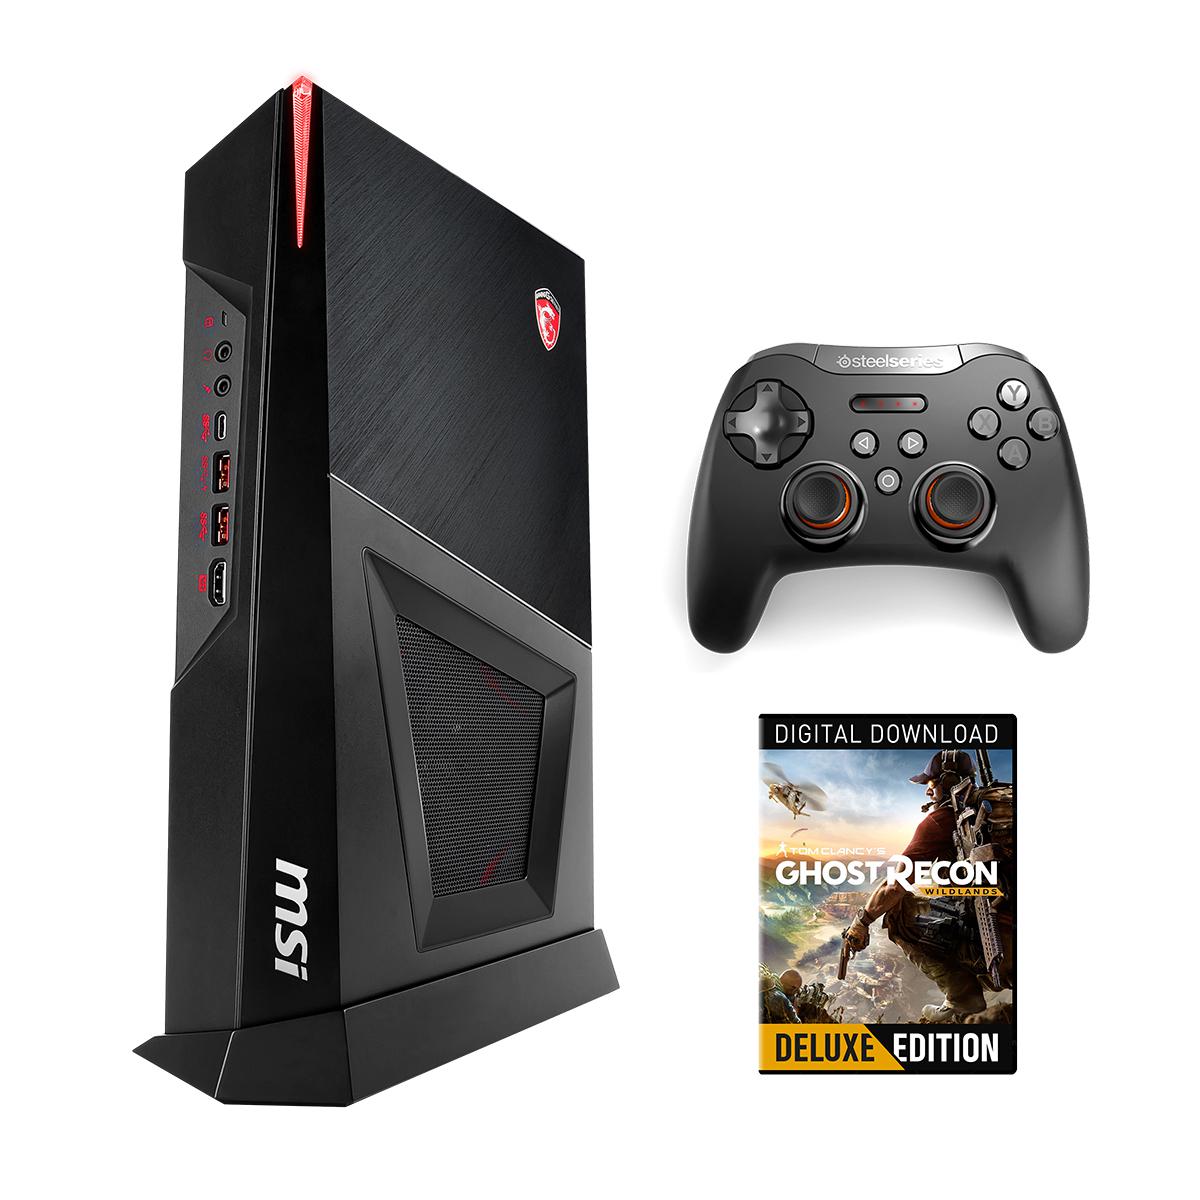 Msi-trident_3-bundle-product_pictures-ww_001